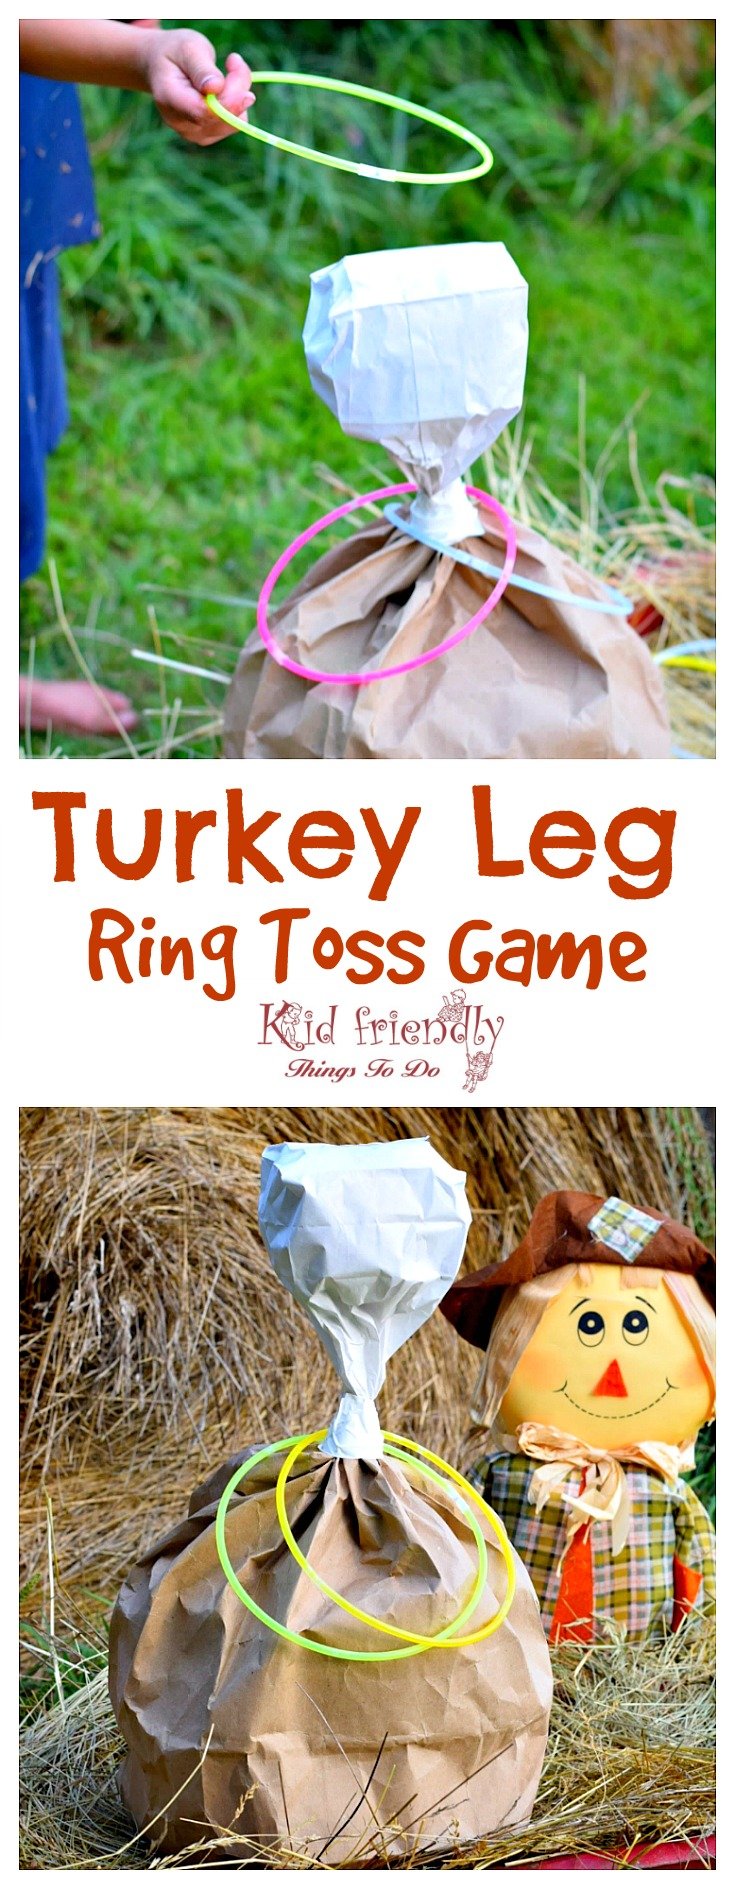 Turkey Leg Ring Toss Thanksgiving Game for Kids and Family - Use glow in the dark necklaces for night time fun! Perfect for preschool and elementary school parties. It's so easy to make and fun for everyone! fall and harvest party idea - www.kidfriendlythingstodo.com